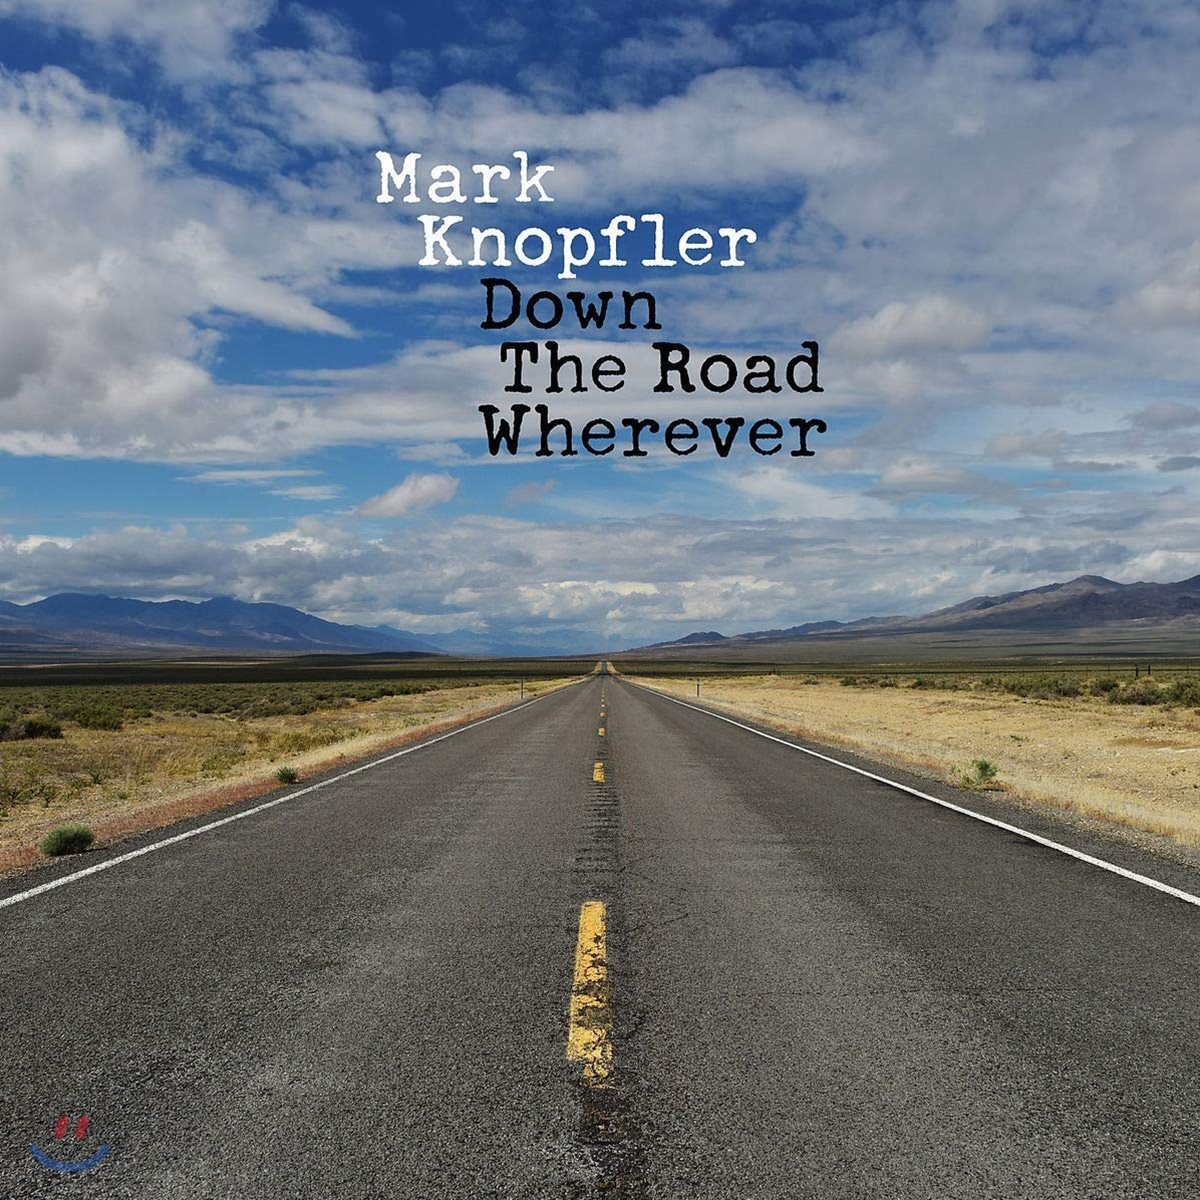 Mark Knopfler (마크 노플러) - Down The Road Wherever [Deluxe Edition]